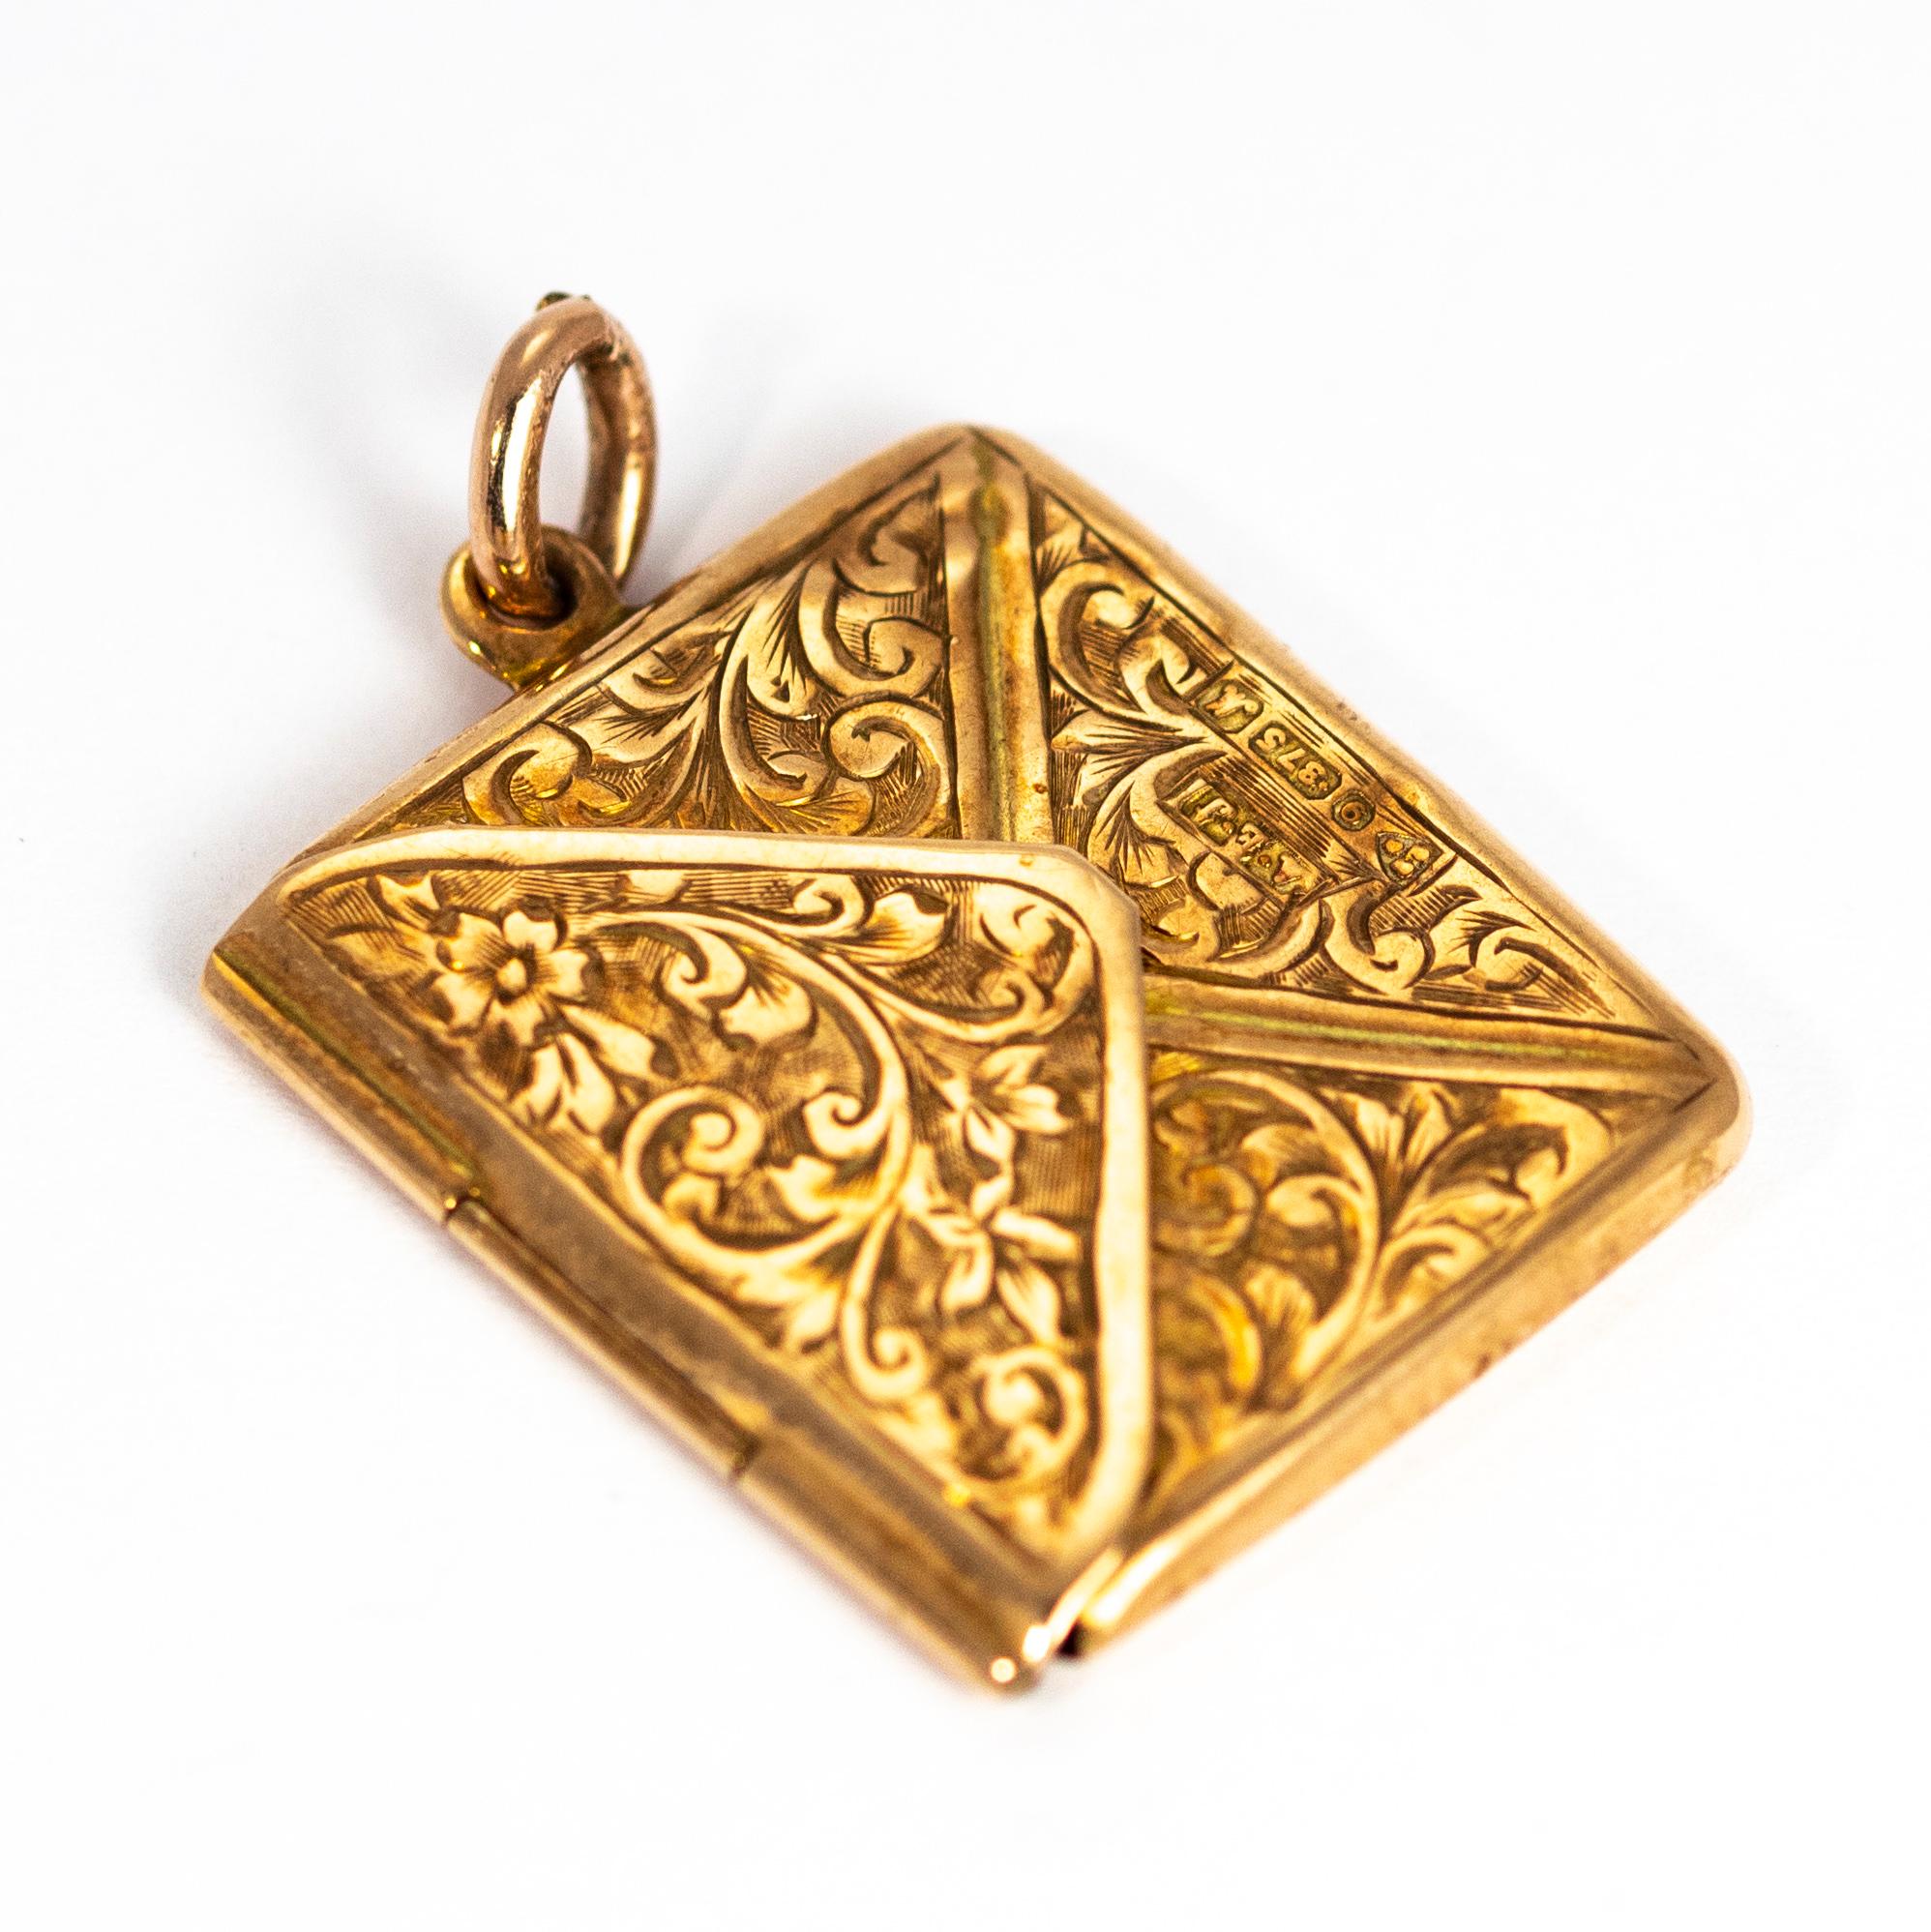 A stunning stamp envelope pendant made by Albert Ernest Jenkins in 1961. This piece is exquisitely hand chased with ornate designs front and back. Modelled in 9 karat yellow gold. 

Fully hallmarked 1961 Chester, England.